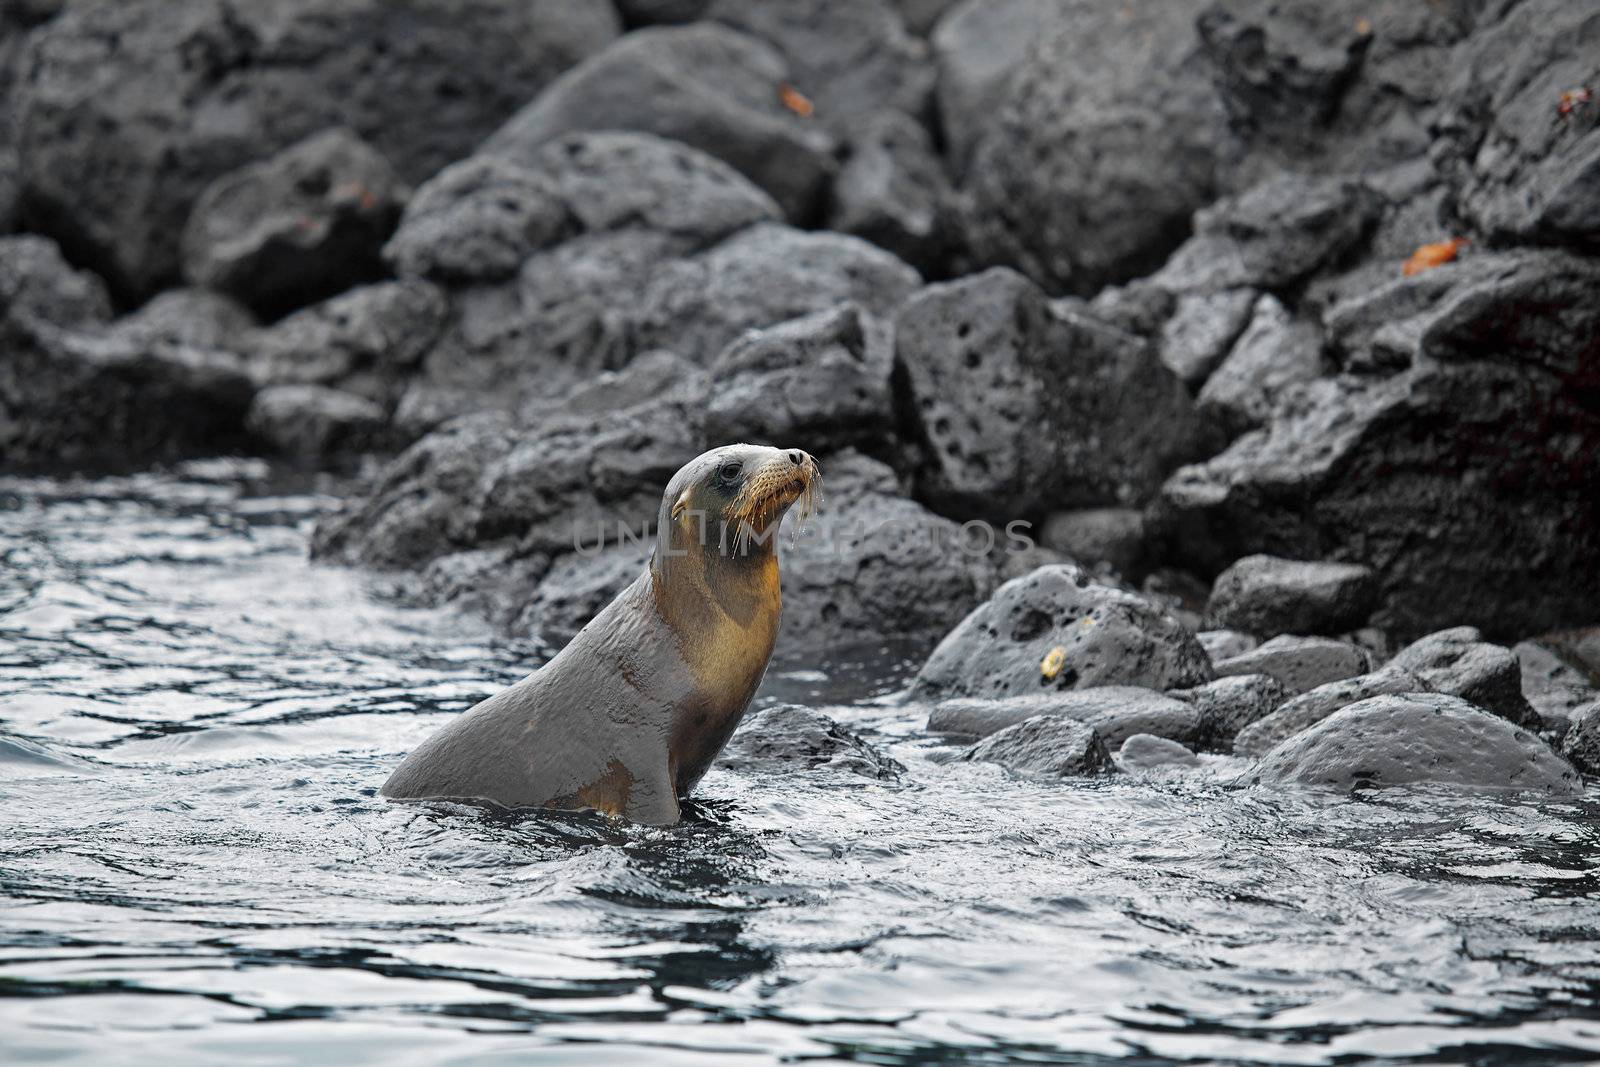 Sea lion colony by kjorgen